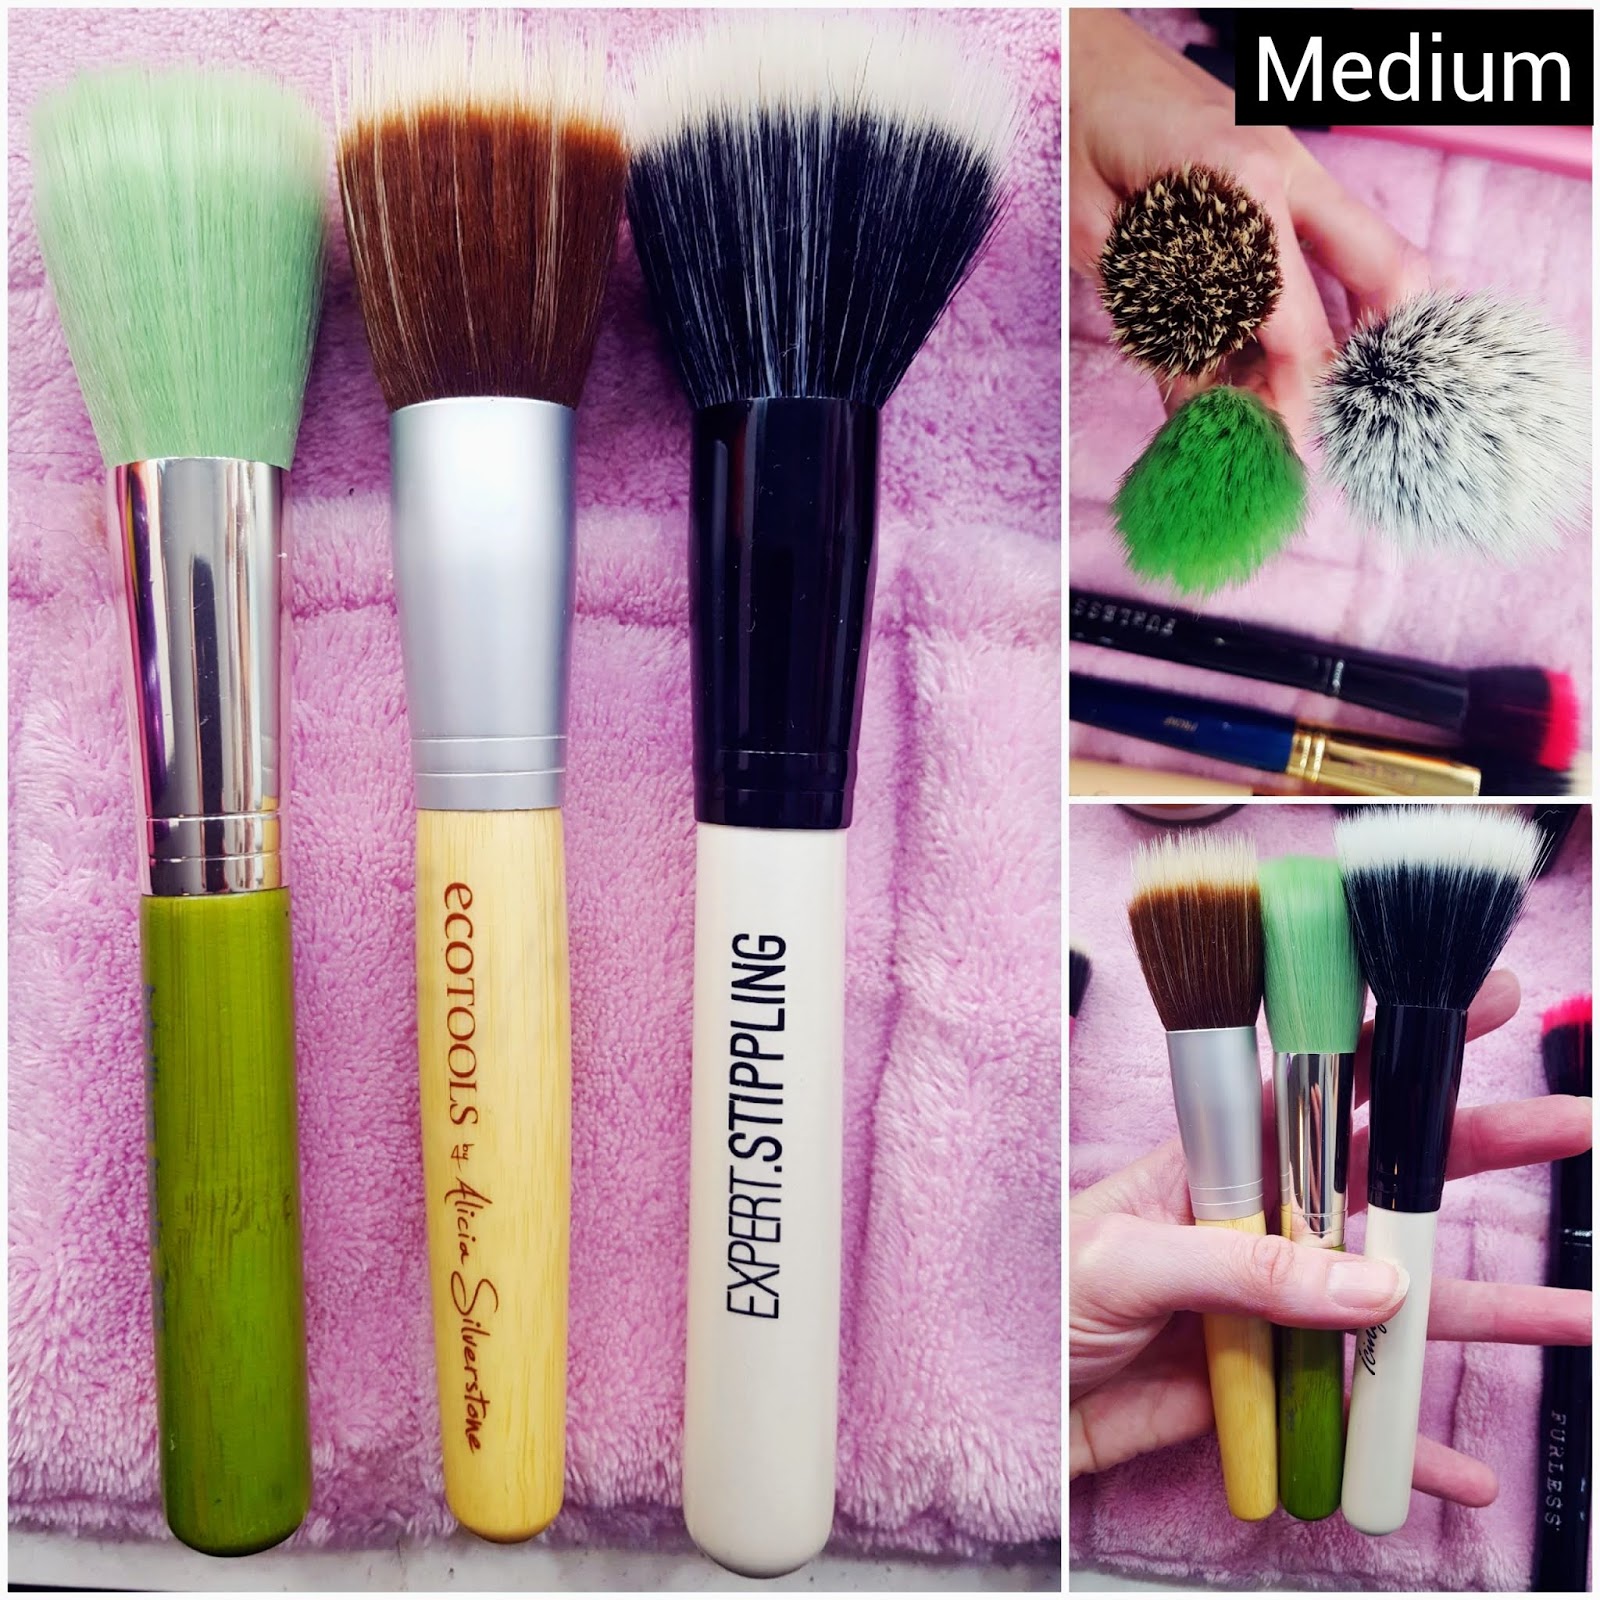 Blush Master and Stippling Brush by COL-LAB